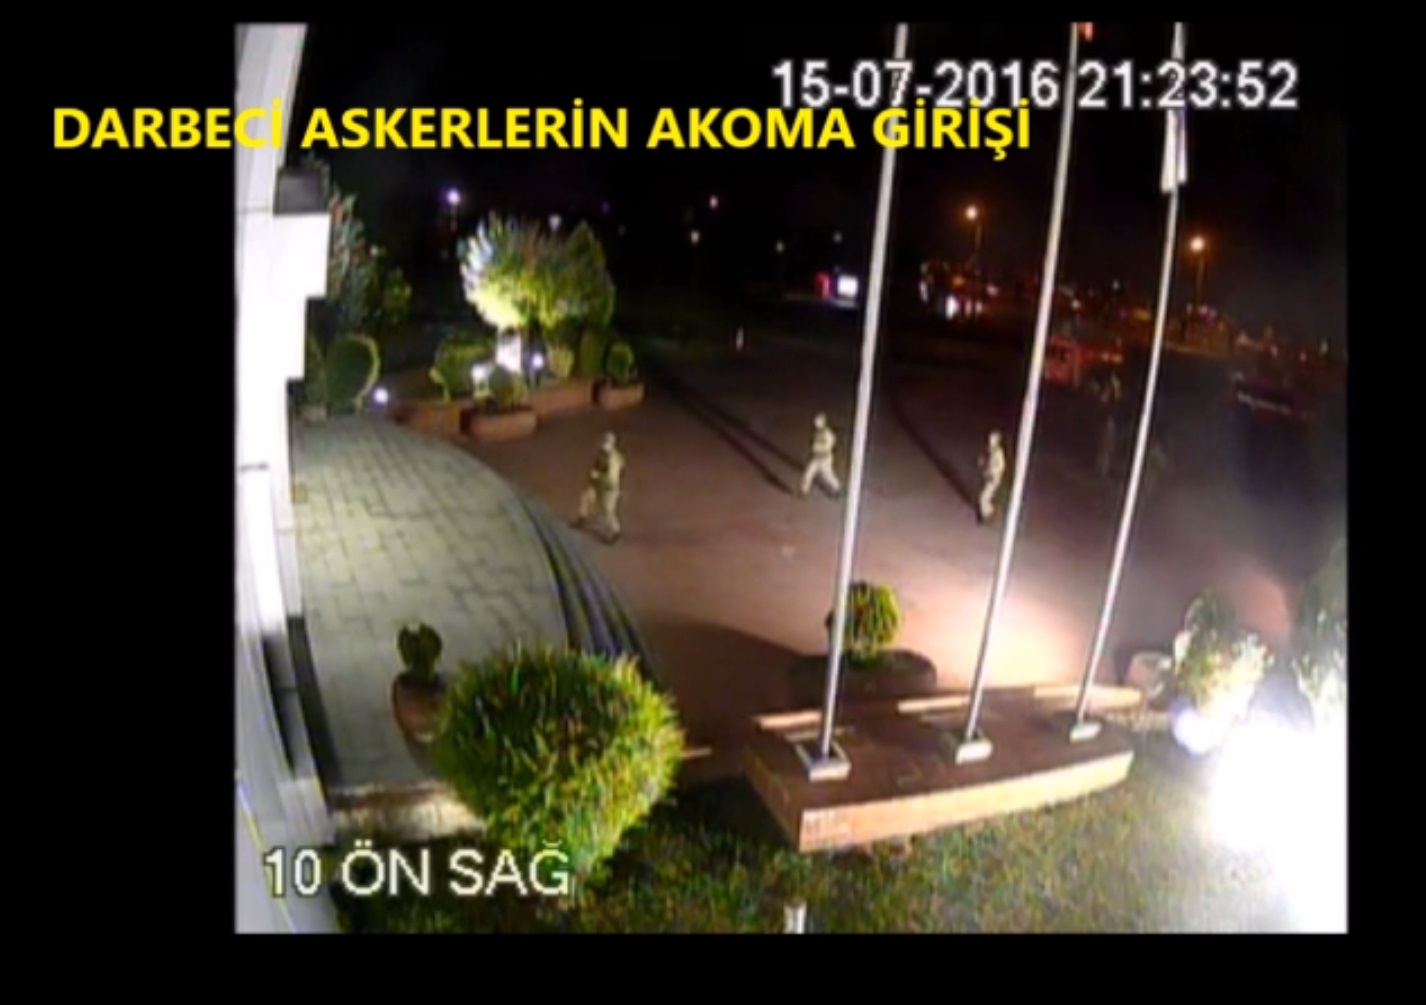 The center was targeted by putschist traitors since Istanbul can be thoroughly monitored through city surveillance cameras at AKOM.